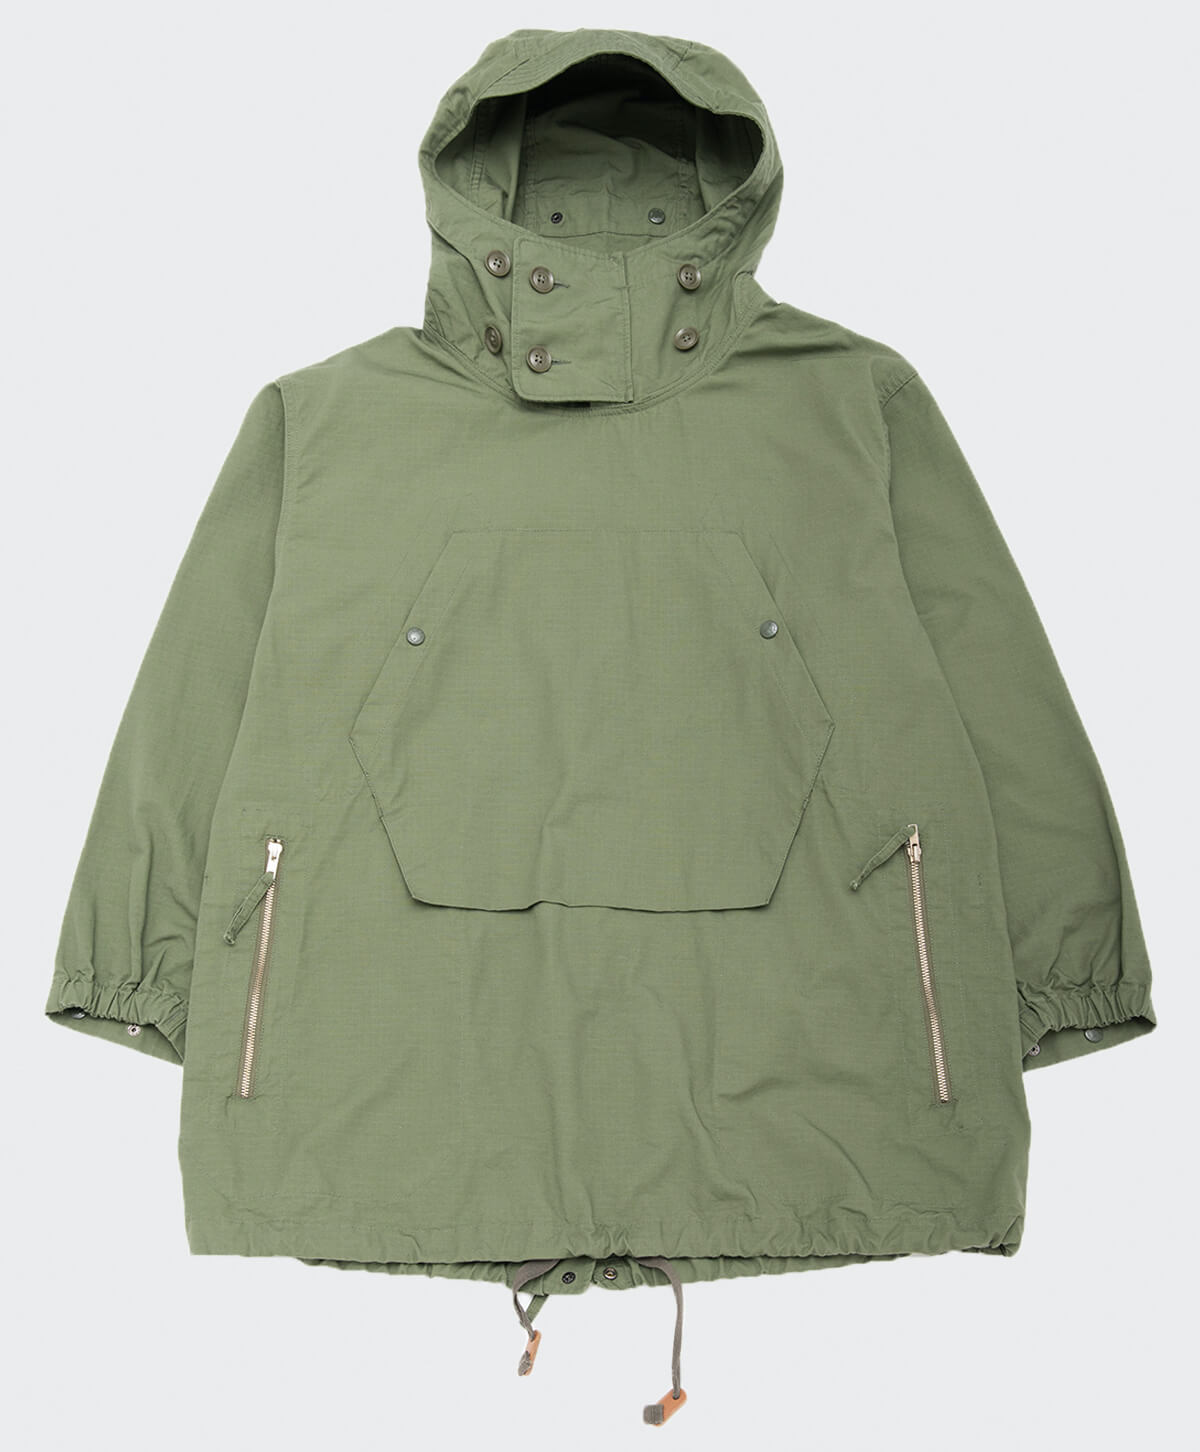 Engineered Garments Over Parka | Details & Styling | Canoe Club